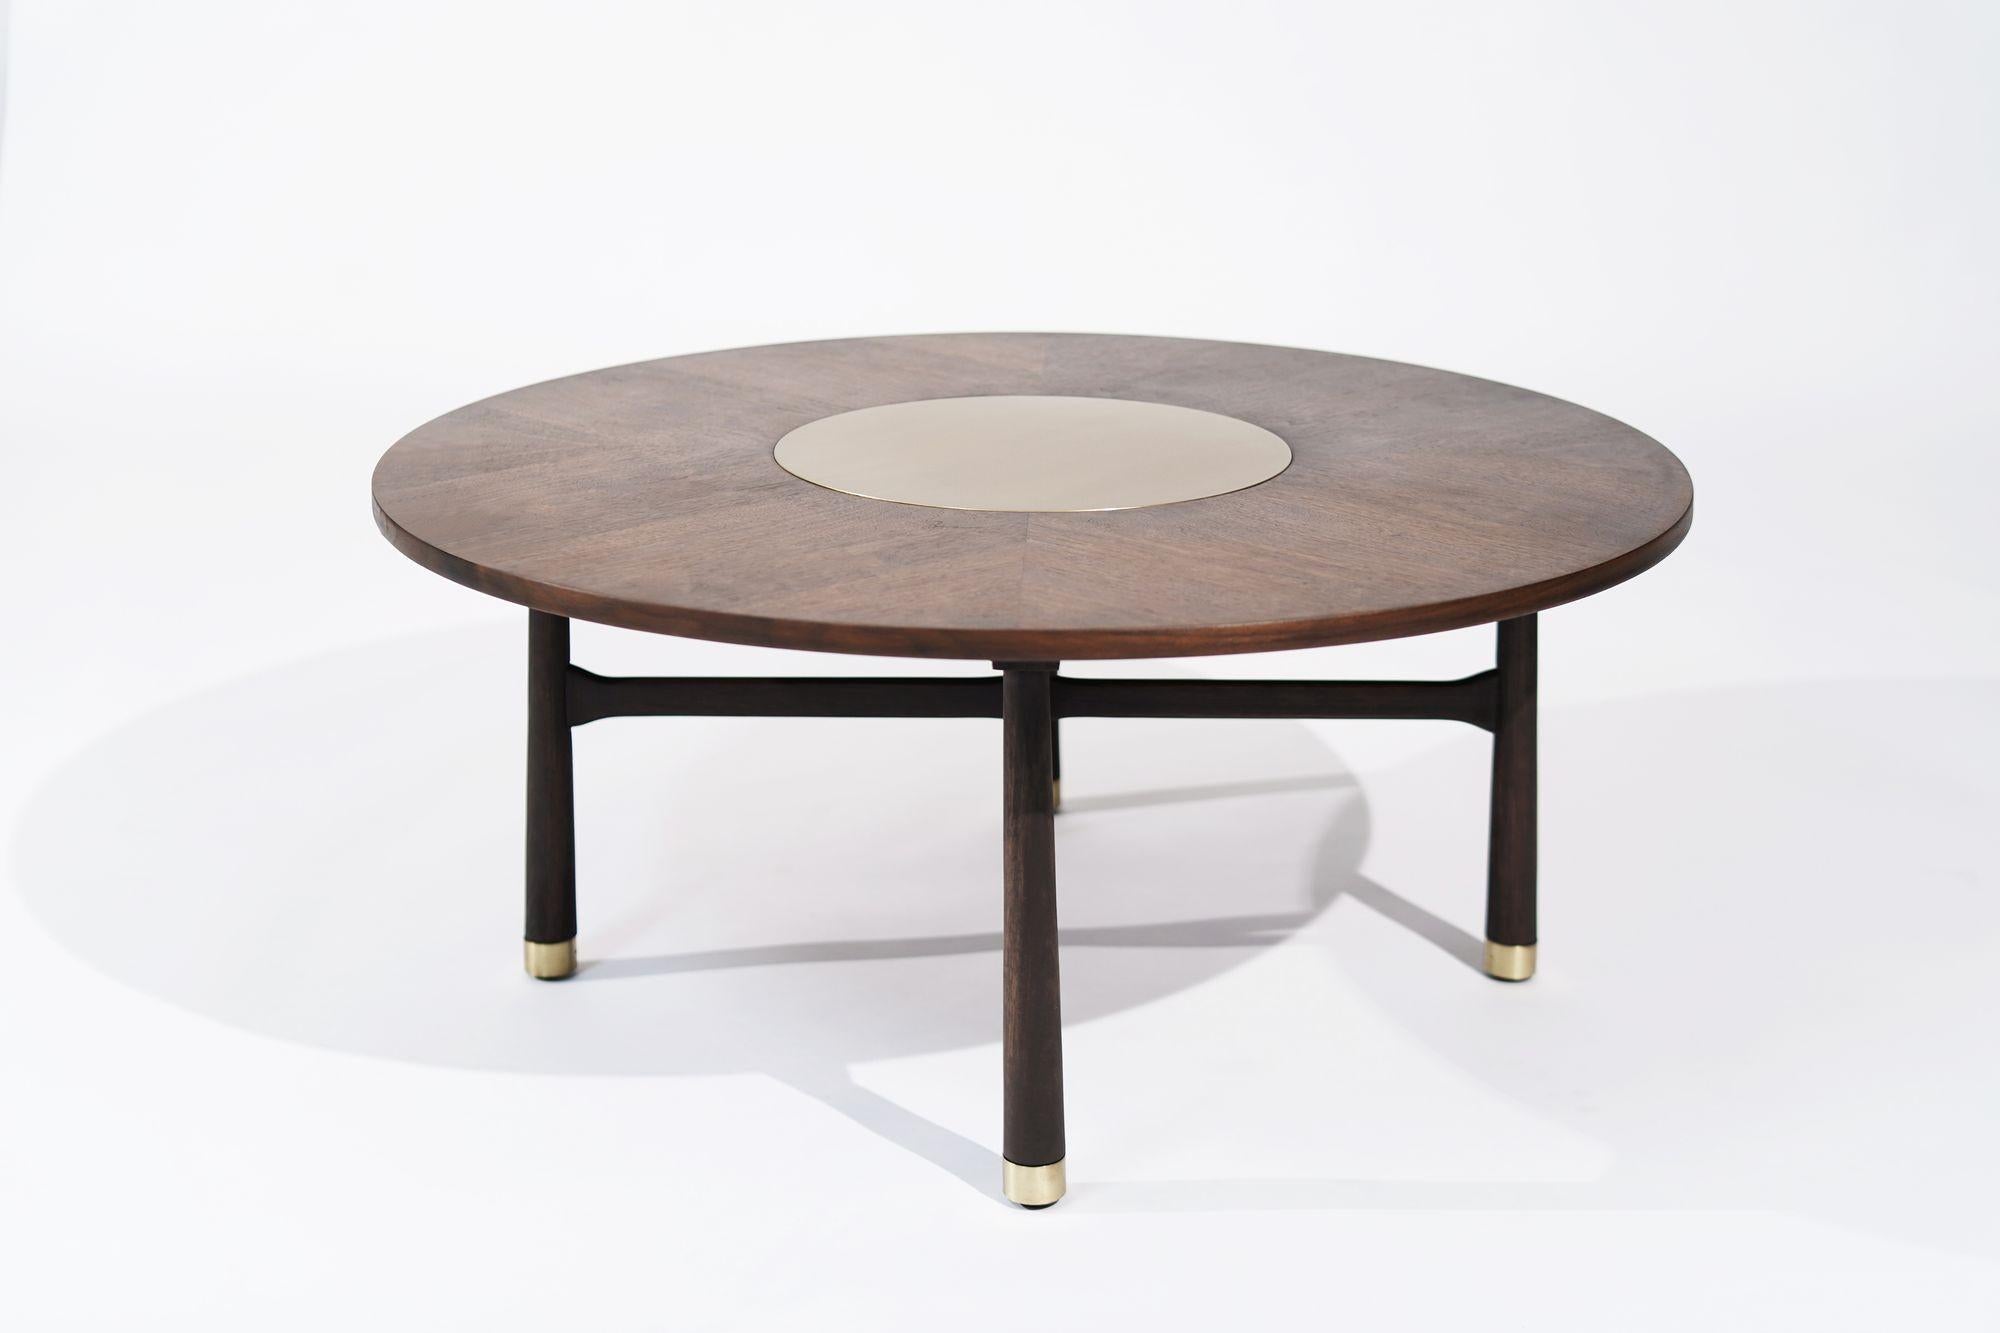 20th Century Walnut and Brass Coffee Table by Harvey Probber, C. 1950s For Sale